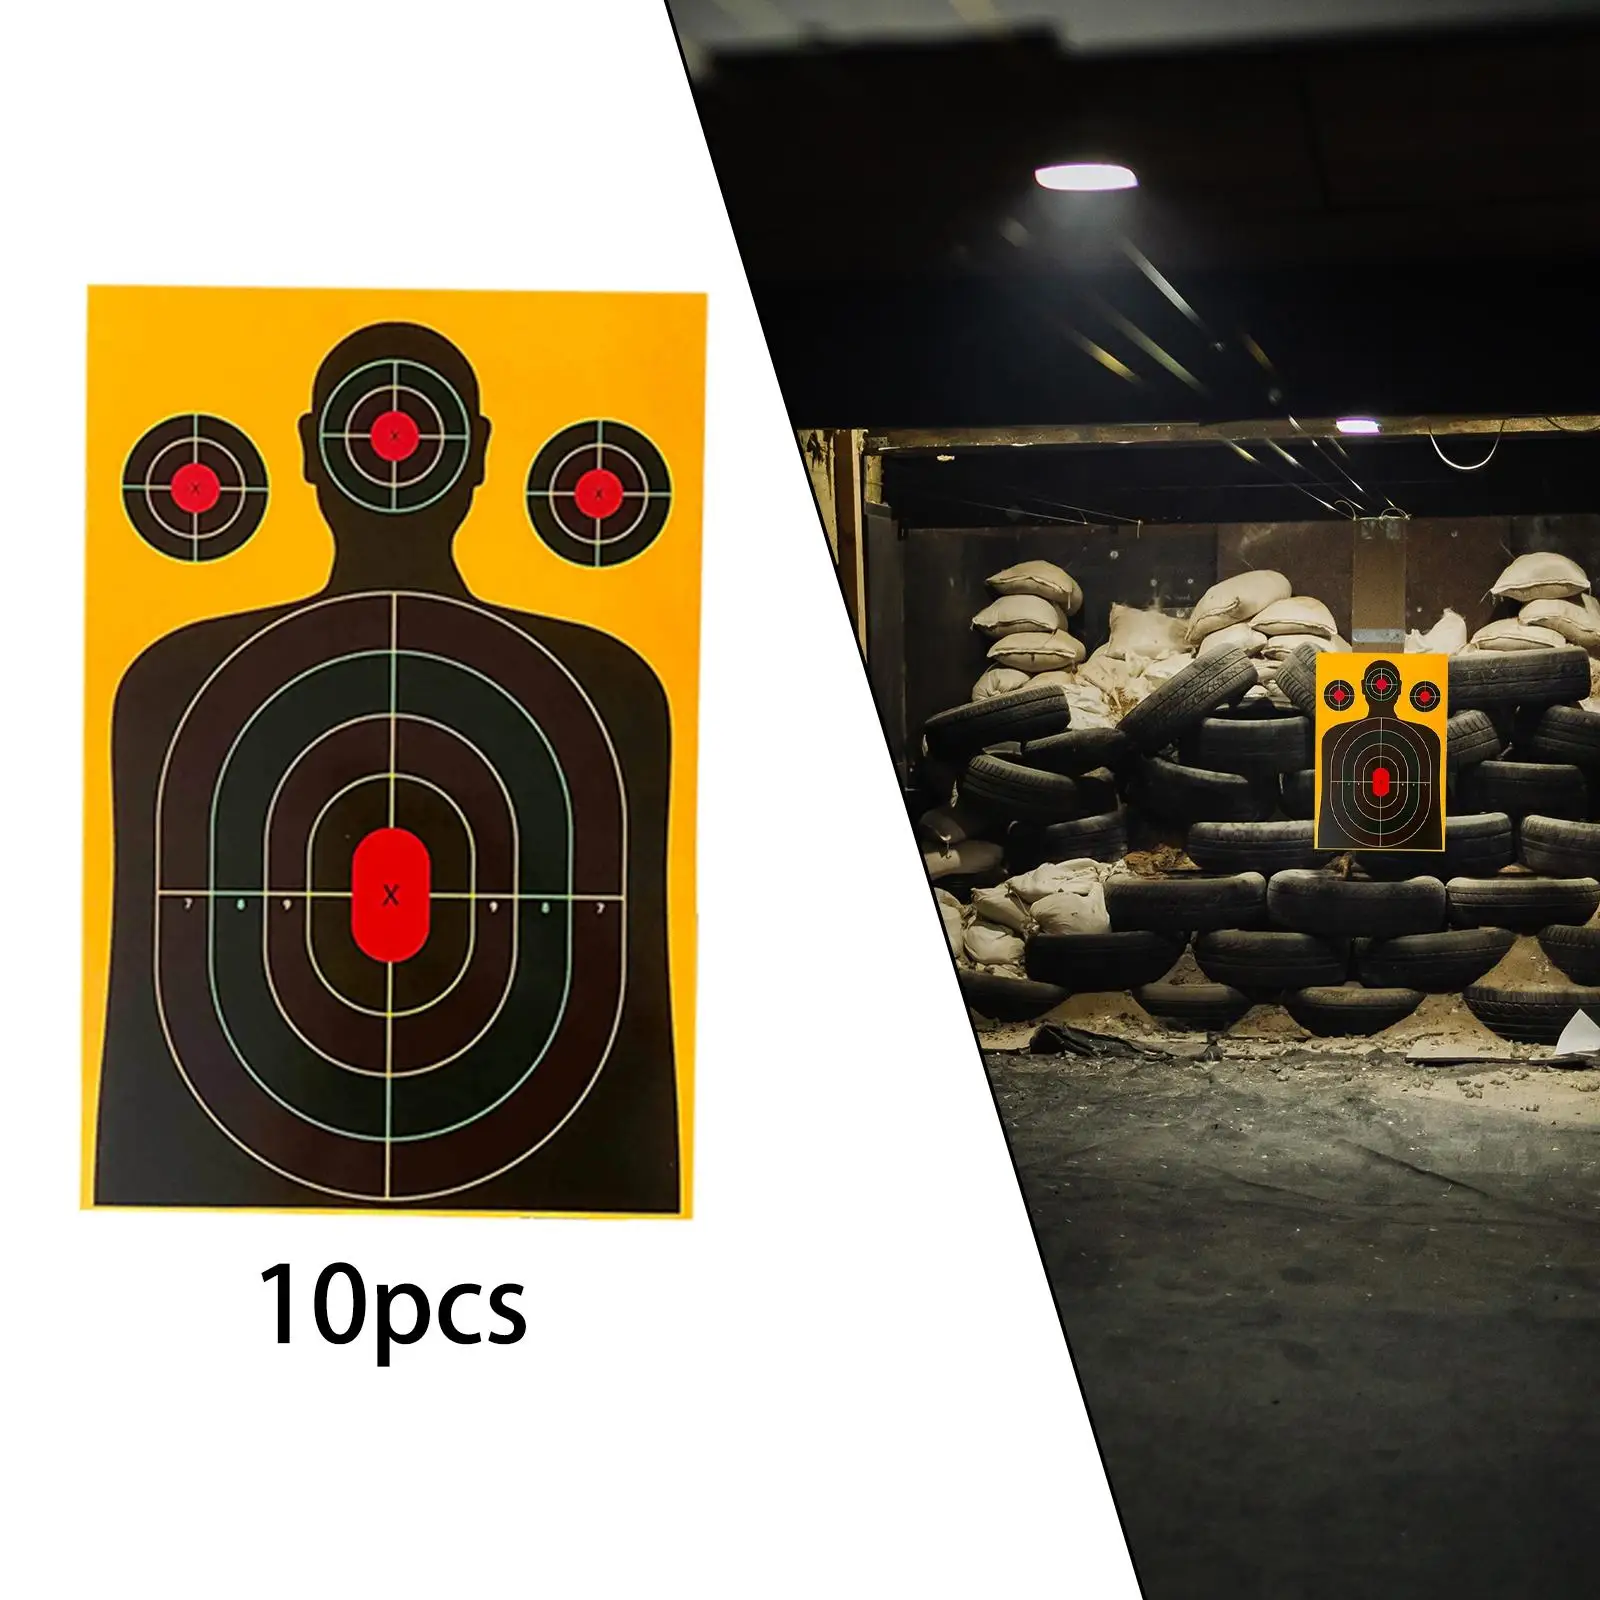 10Pcs Silhouette Target Training Target Outdoor Activities Hunting Practice Letter Partition Professional Target Target Paper